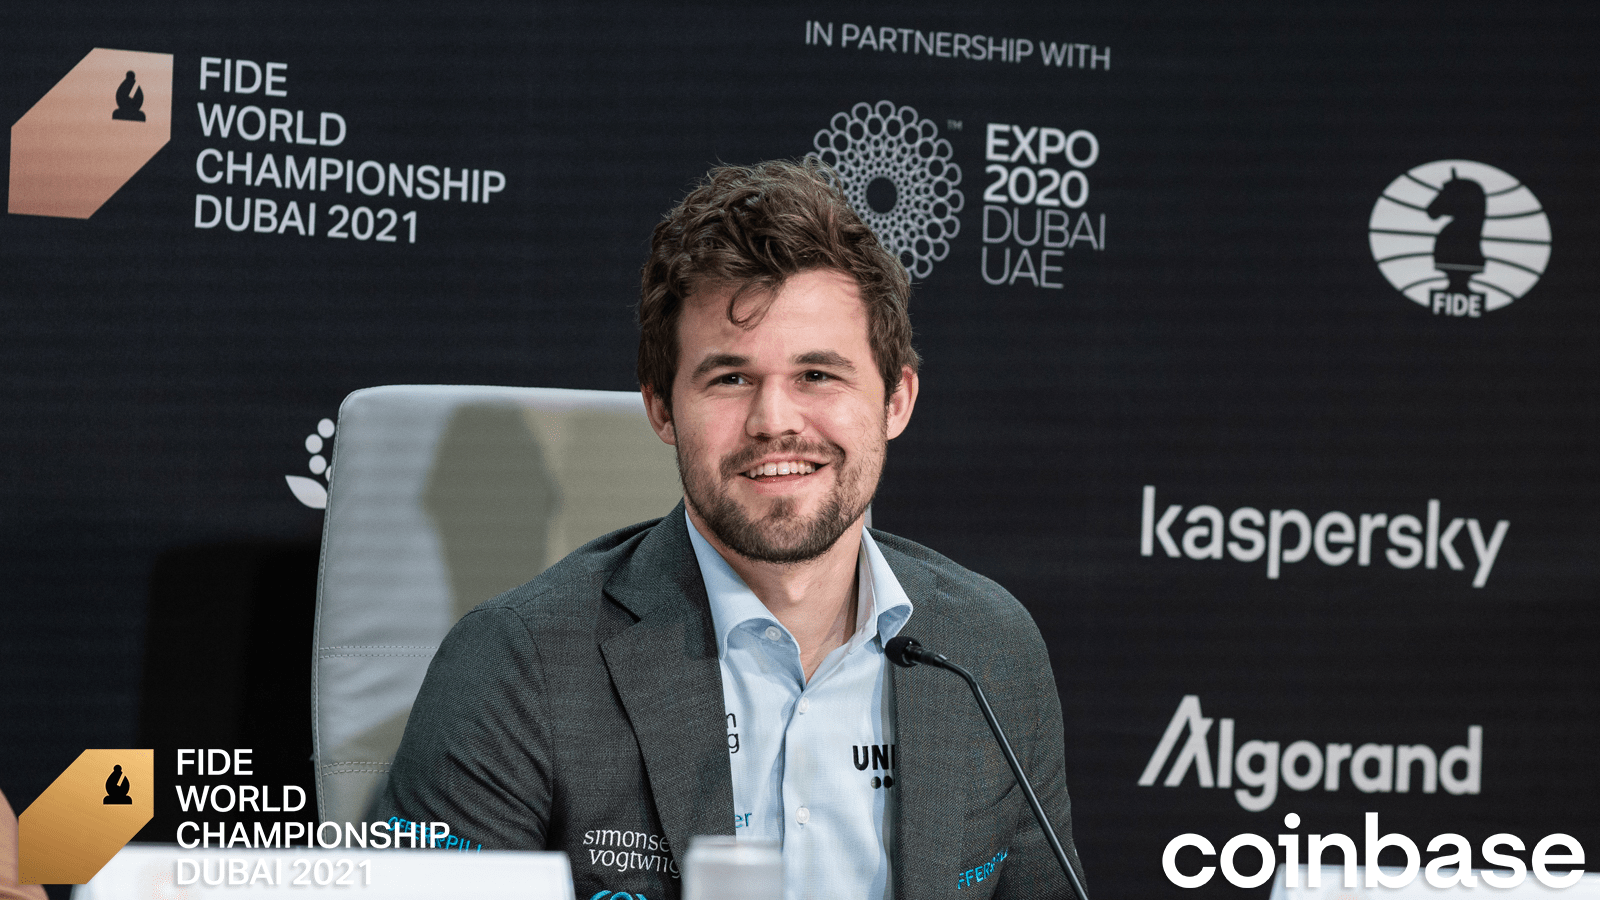 Magnus Carlsen's world title victory also proves big win for online fans, World Chess Championship 2021